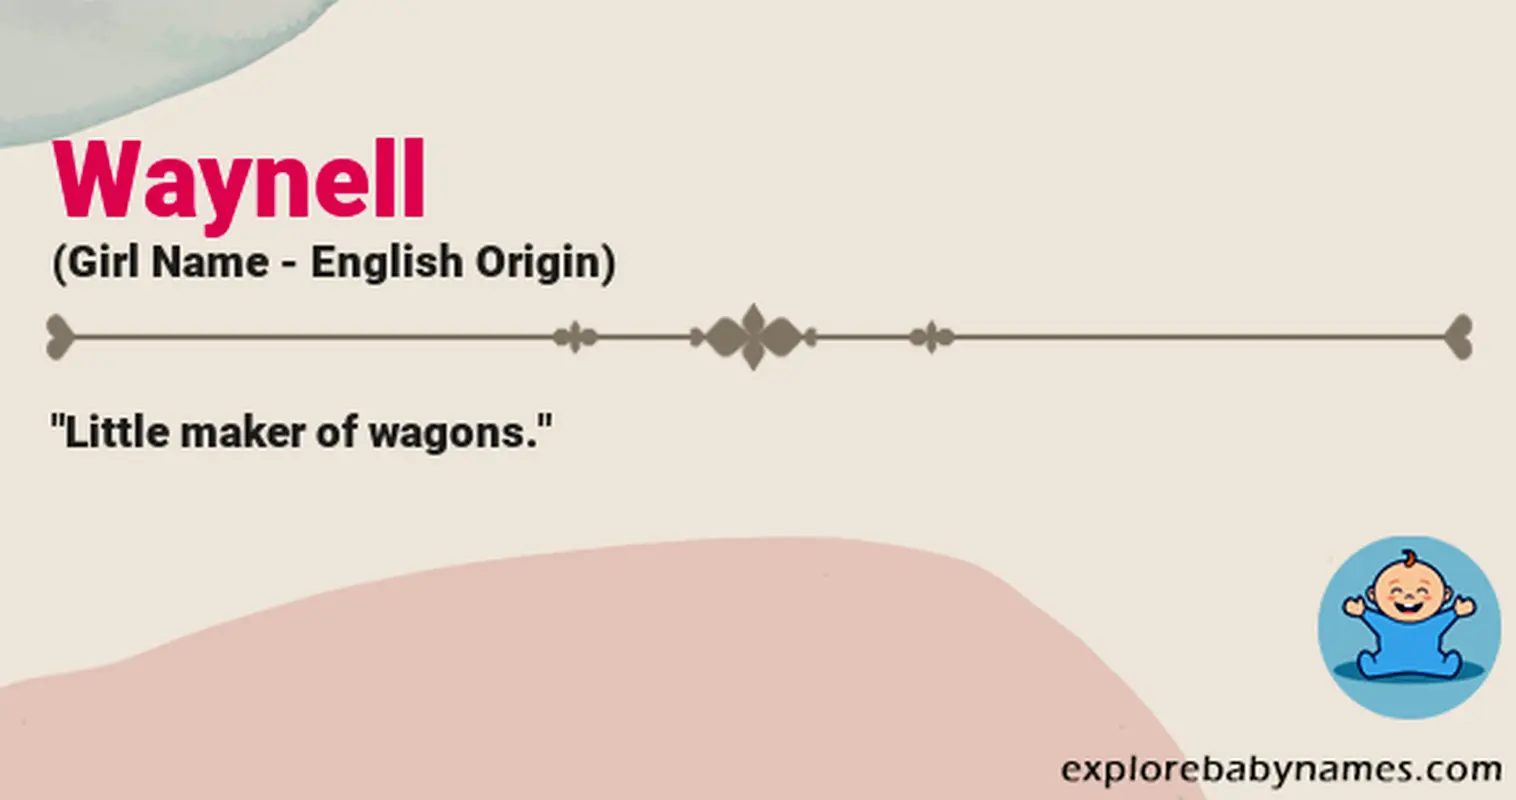 Meaning of Waynell